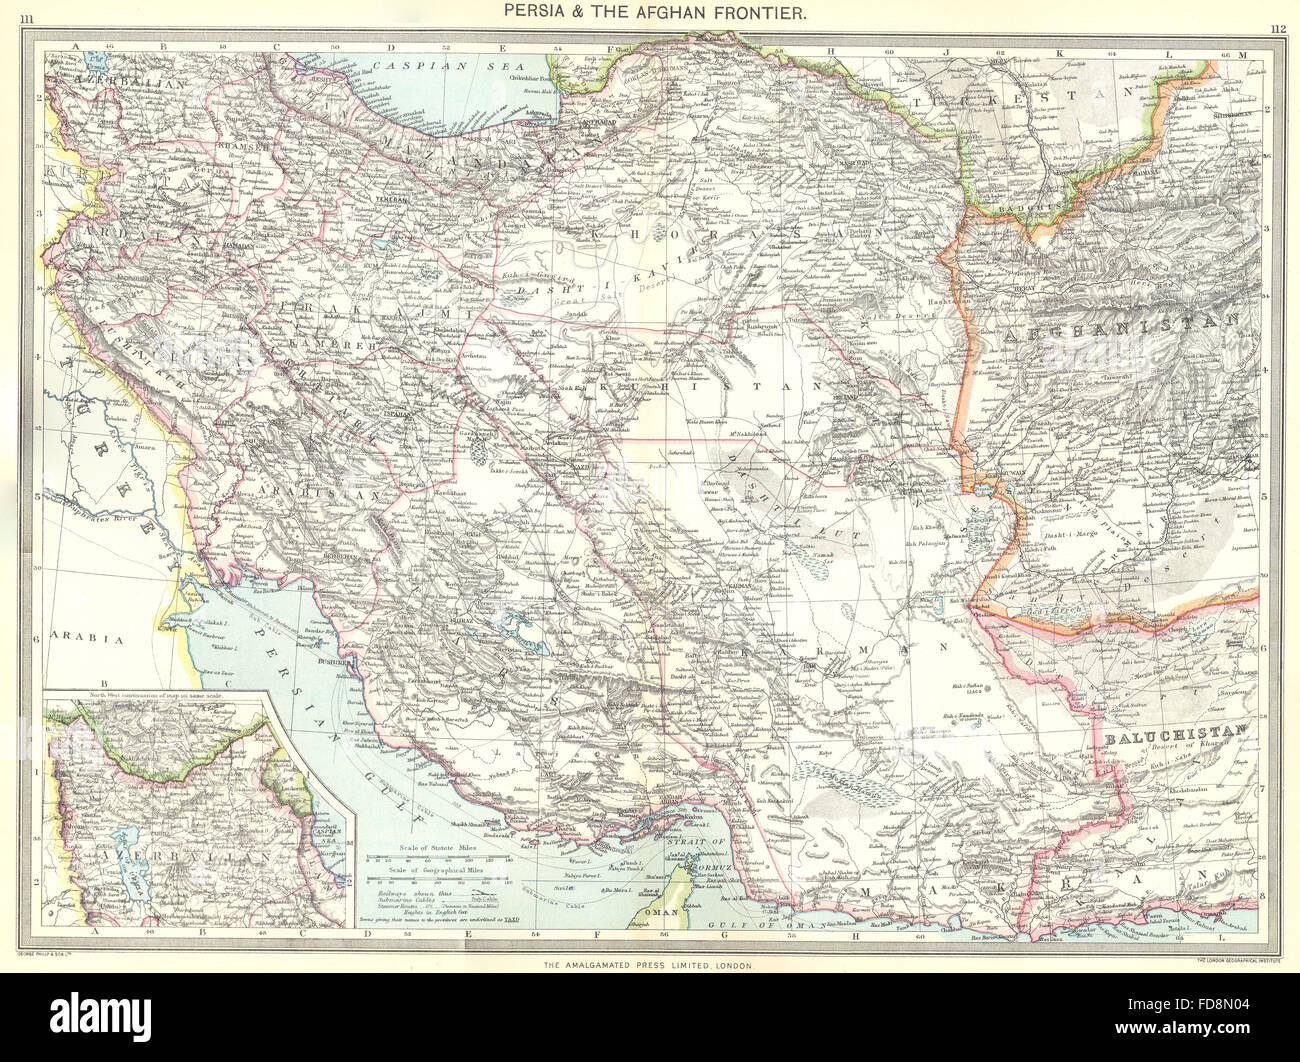 IRAN: Iran and the Afghan Frontier; Inset map of Azerbaijan, 1907 Stock Photo